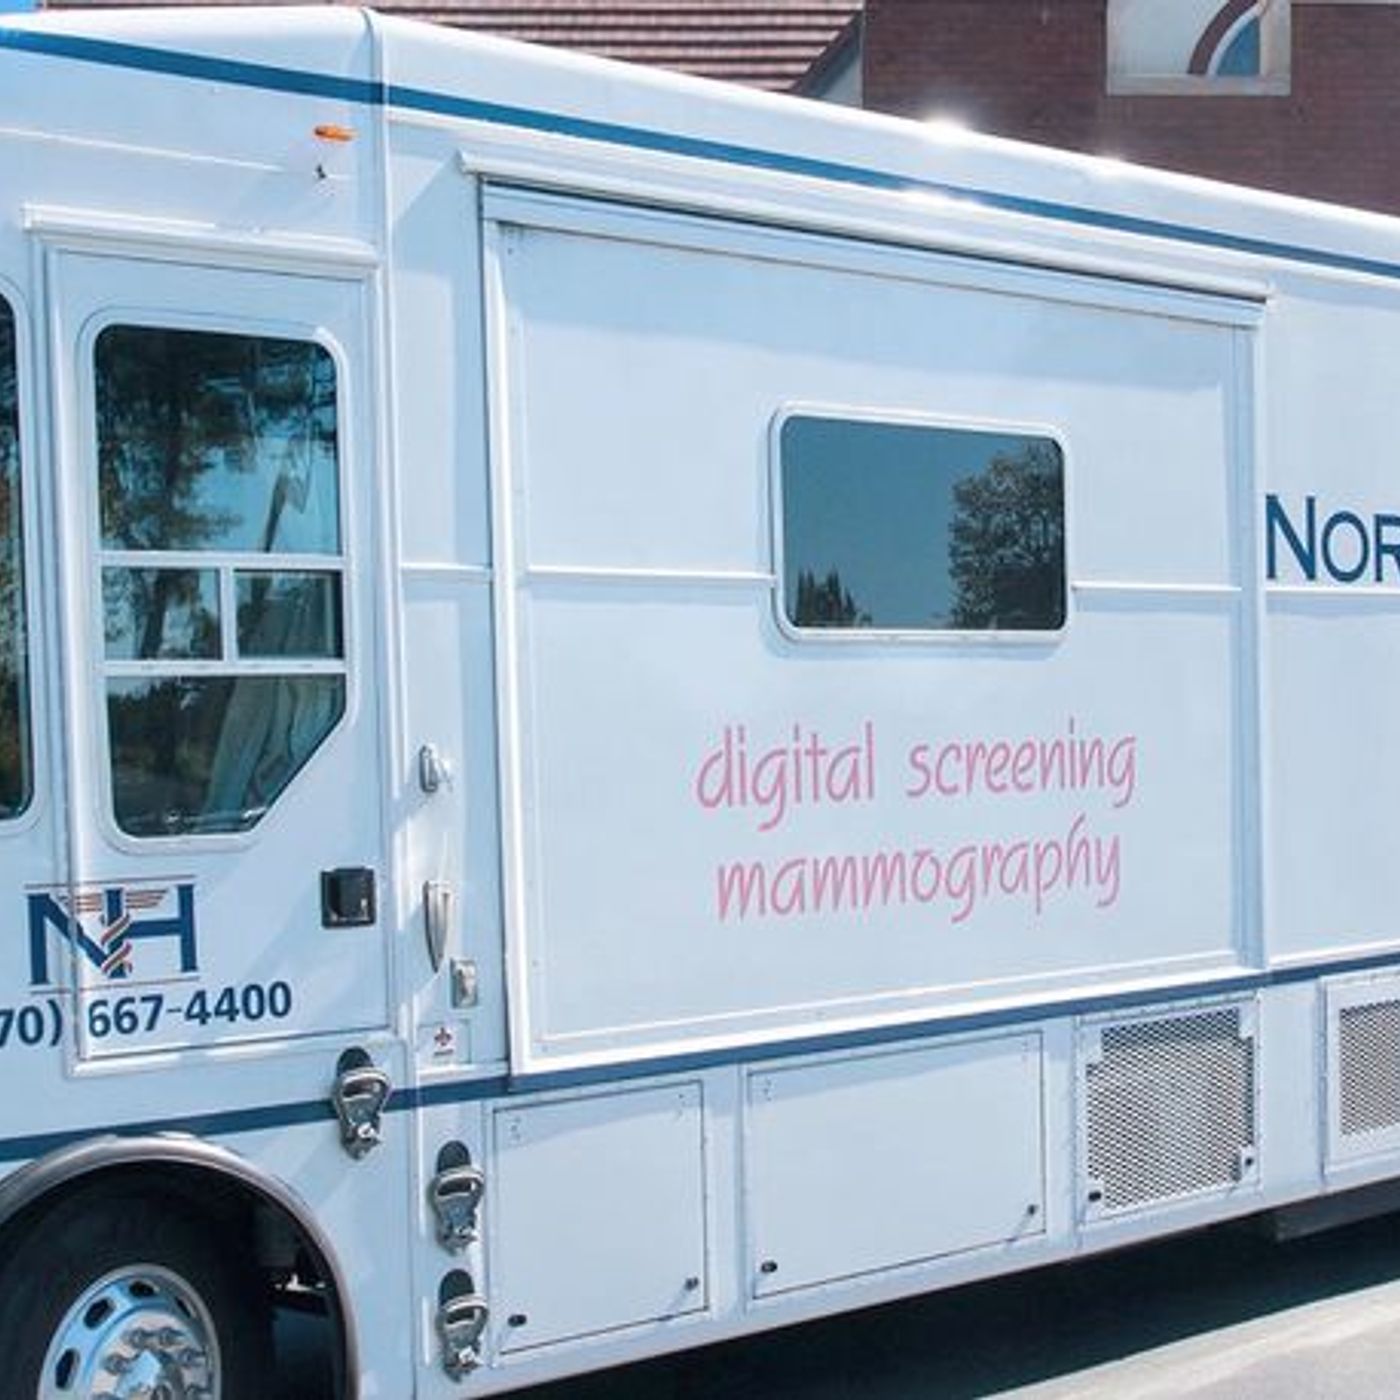 Attention Women:  Mobile Mamographies Will Be Happening This Friday